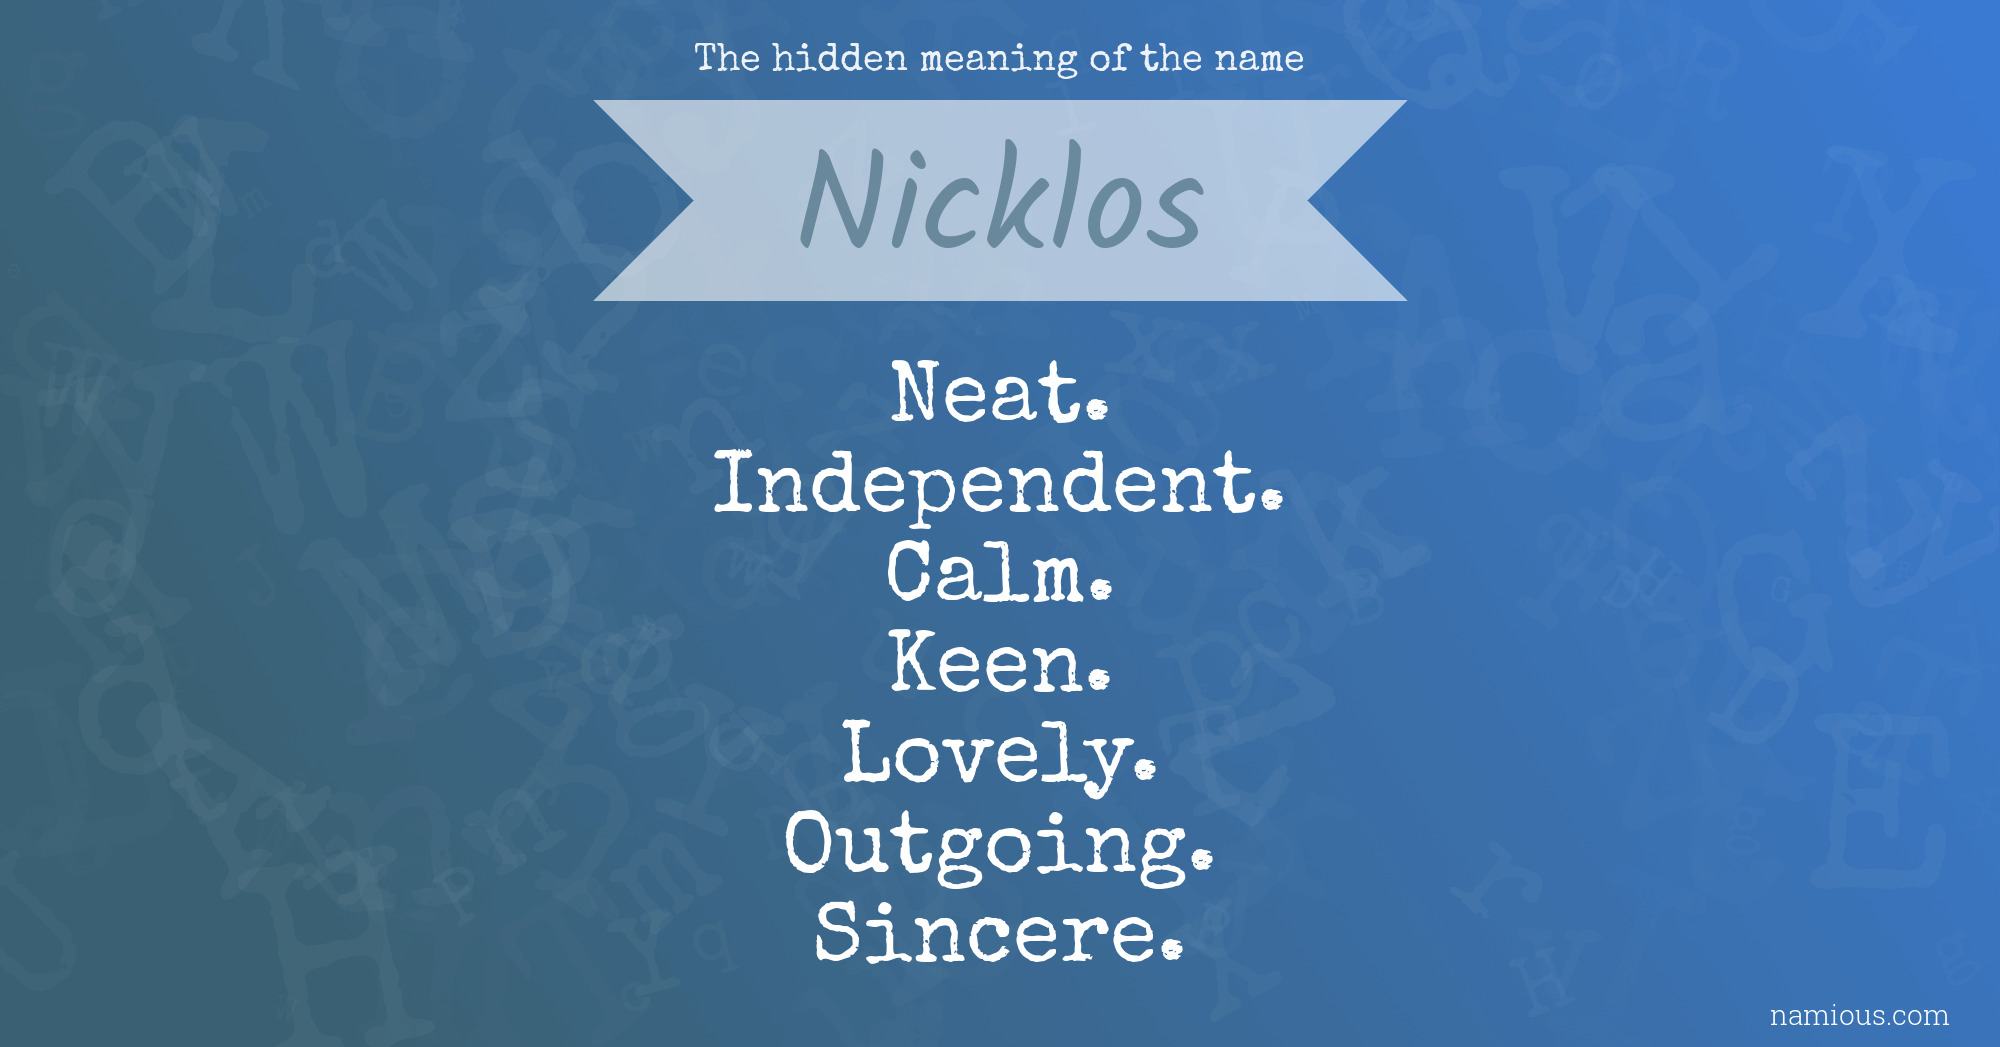 The hidden meaning of the name Nicklos